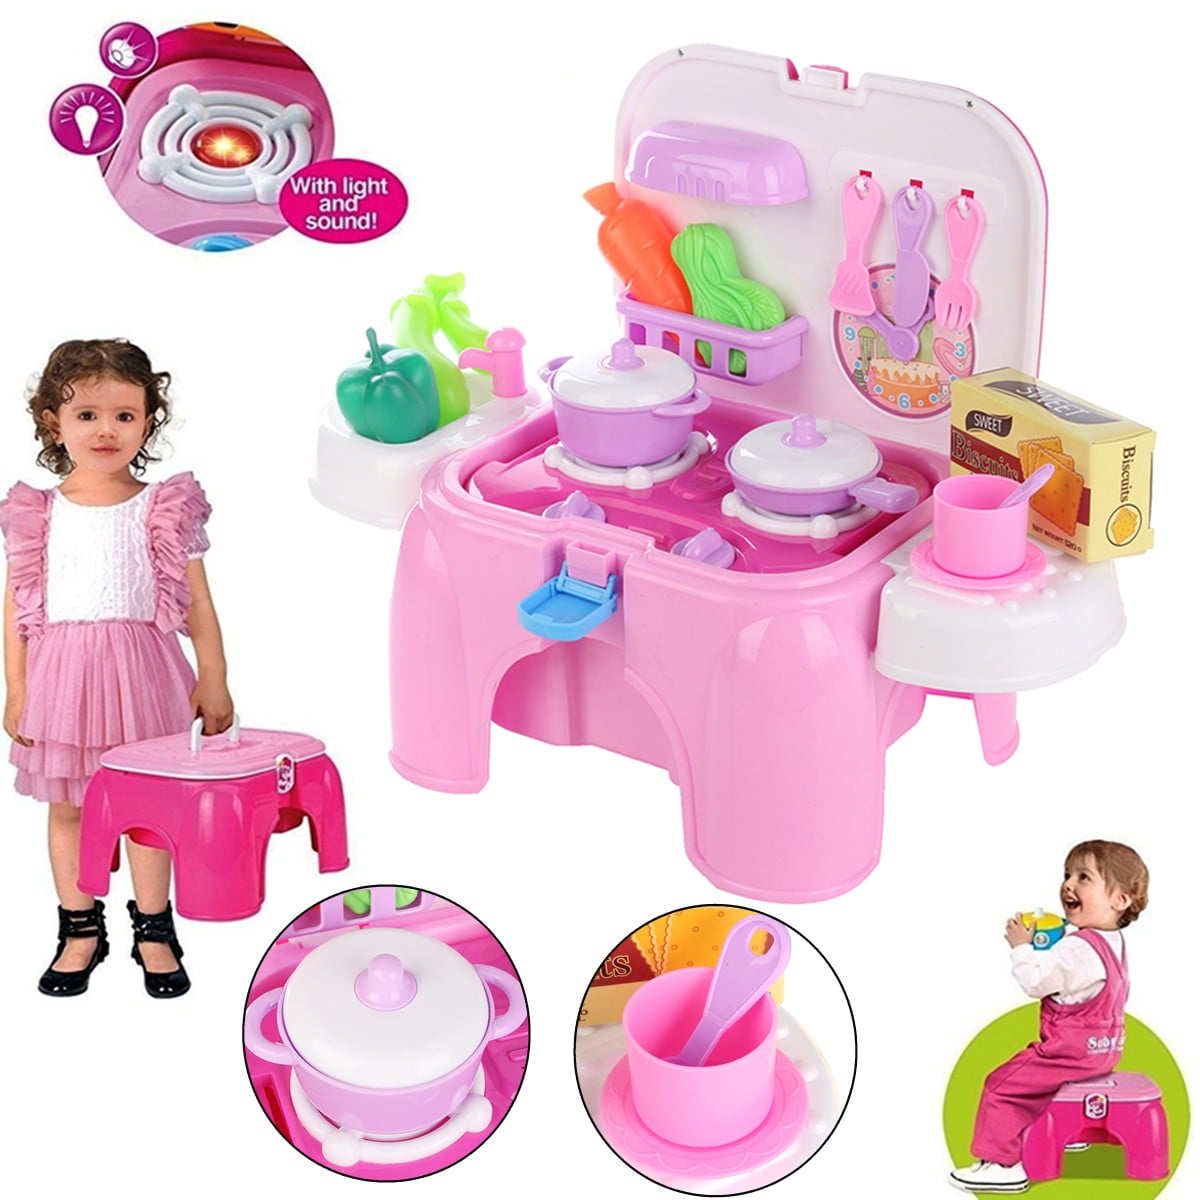 kitchen cooking set for kids